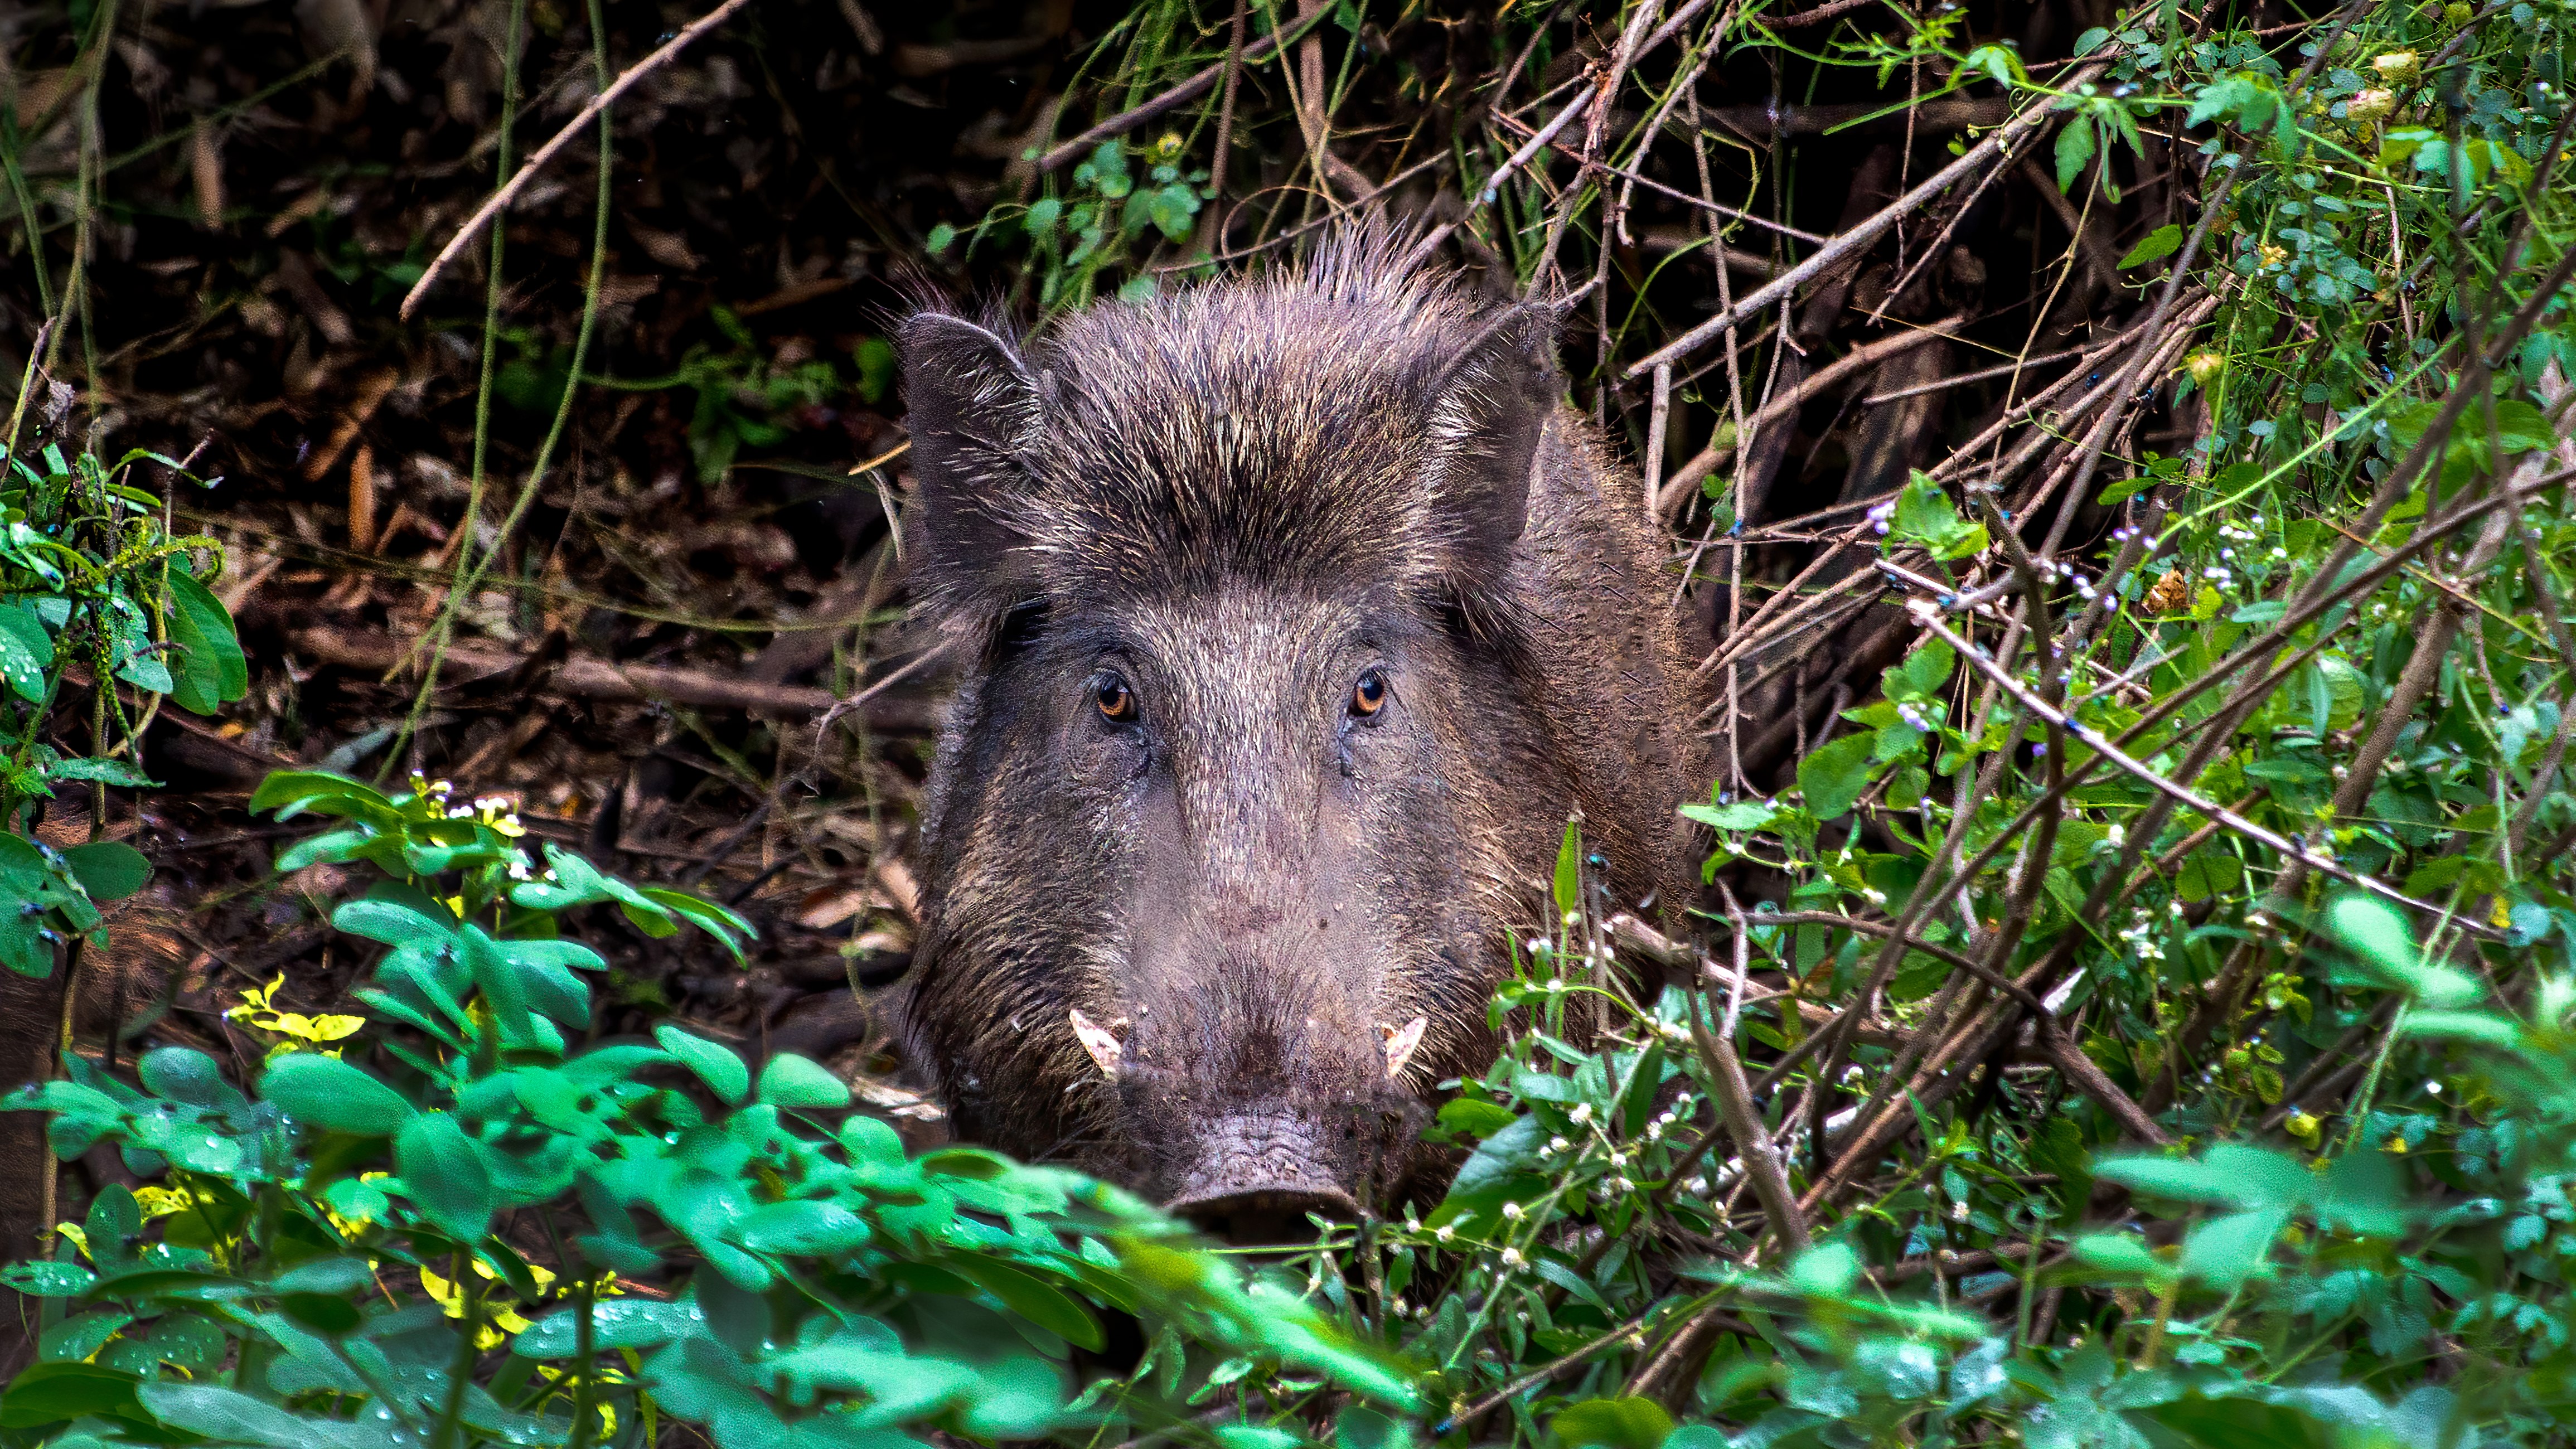 a wild boar in some bushes looking at the camera face on